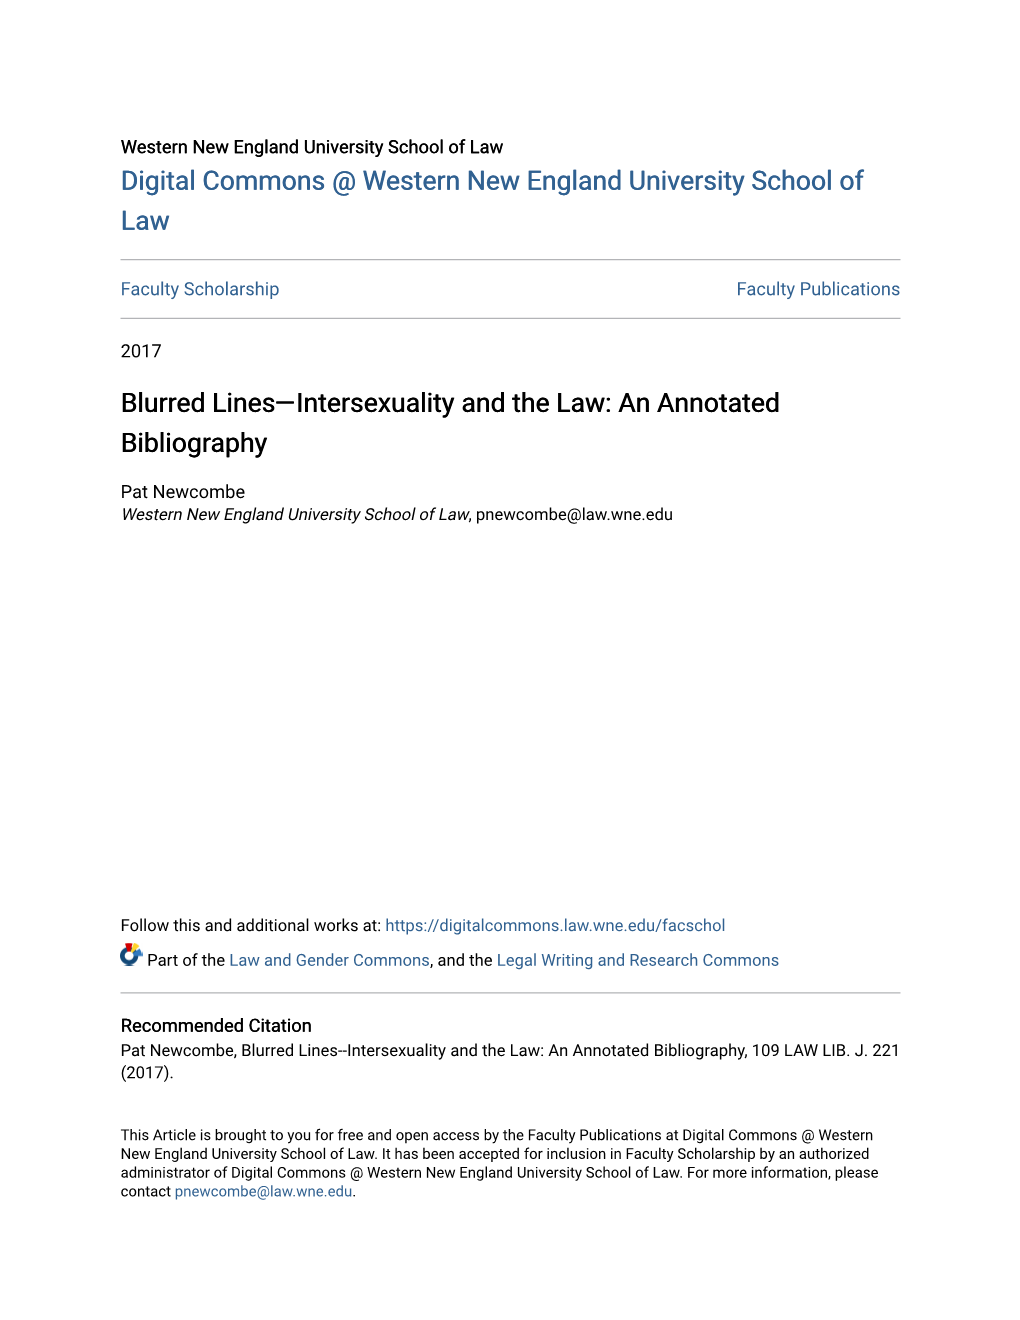 Blurred Lines—Intersexuality and the Law: an Annotated Bibliography